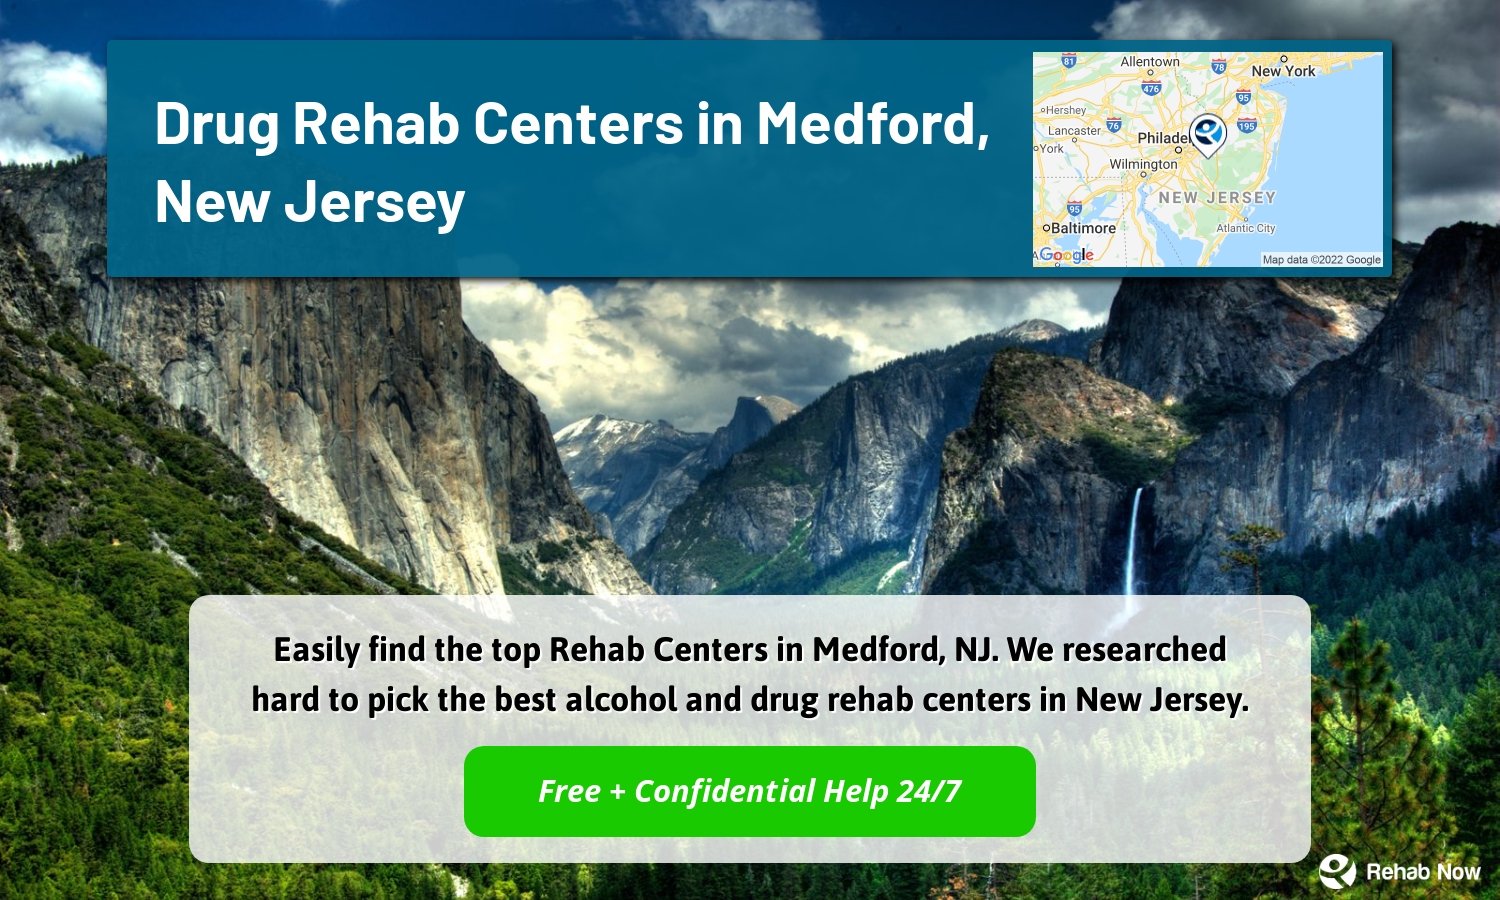 Easily find the top Rehab Centers in Medford, NJ. We researched hard to pick the best alcohol and drug rehab centers in New Jersey.